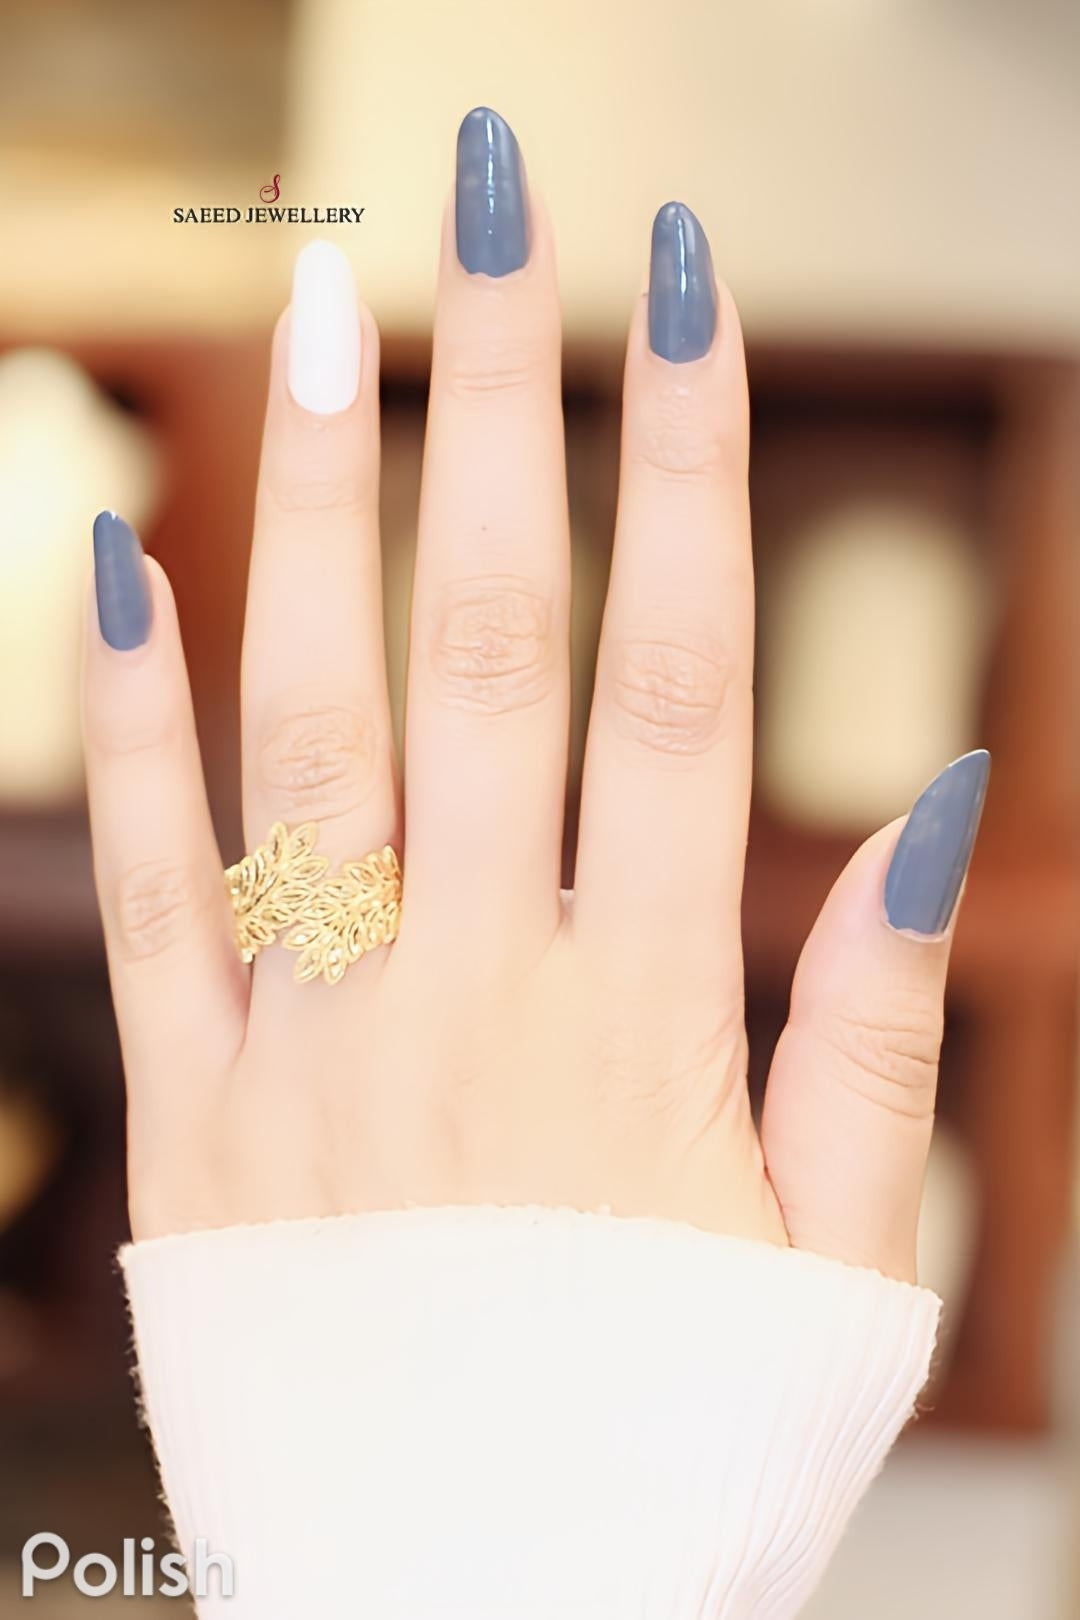 21K Gold Spike Ring by Saeed Jewelry - Image 7